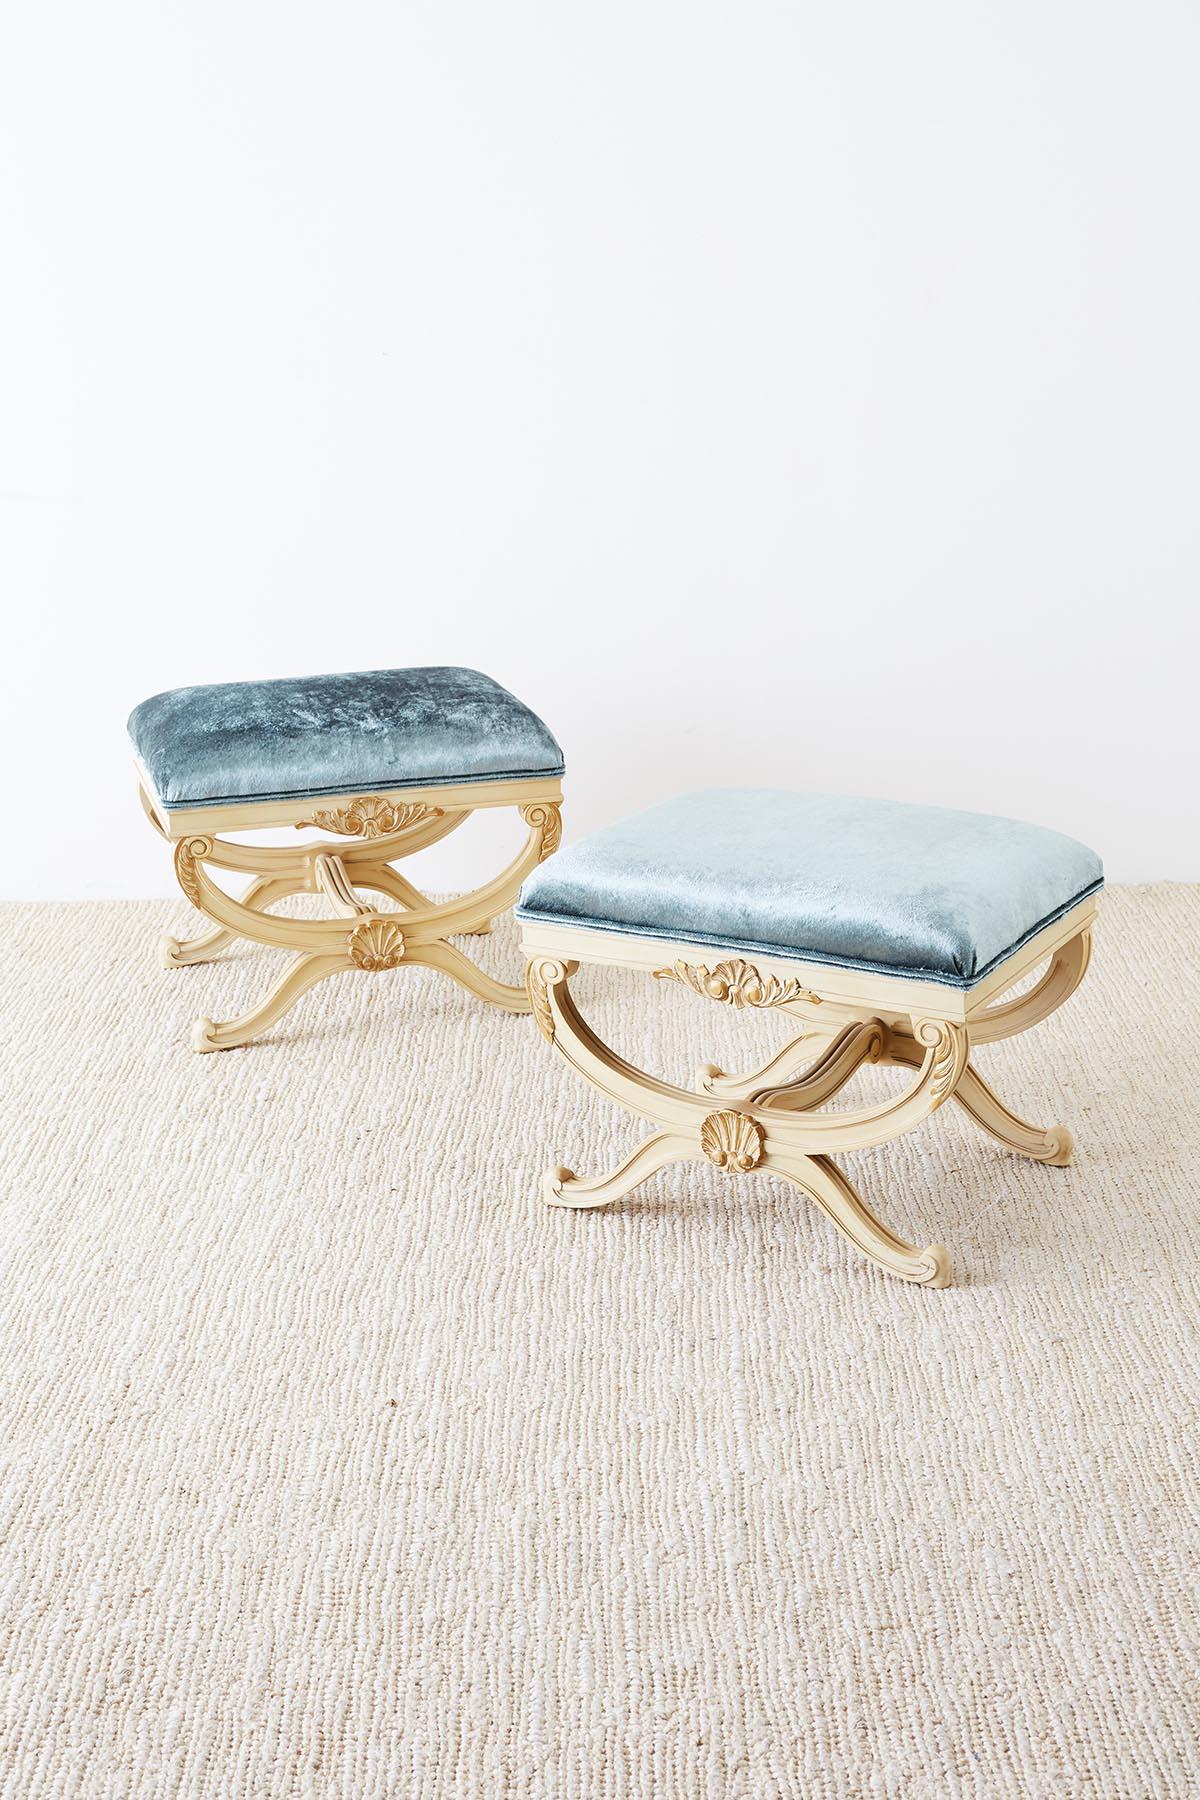 Pair of Curule Stool Benches with Velvet Upholstery (Hollywood Regency)